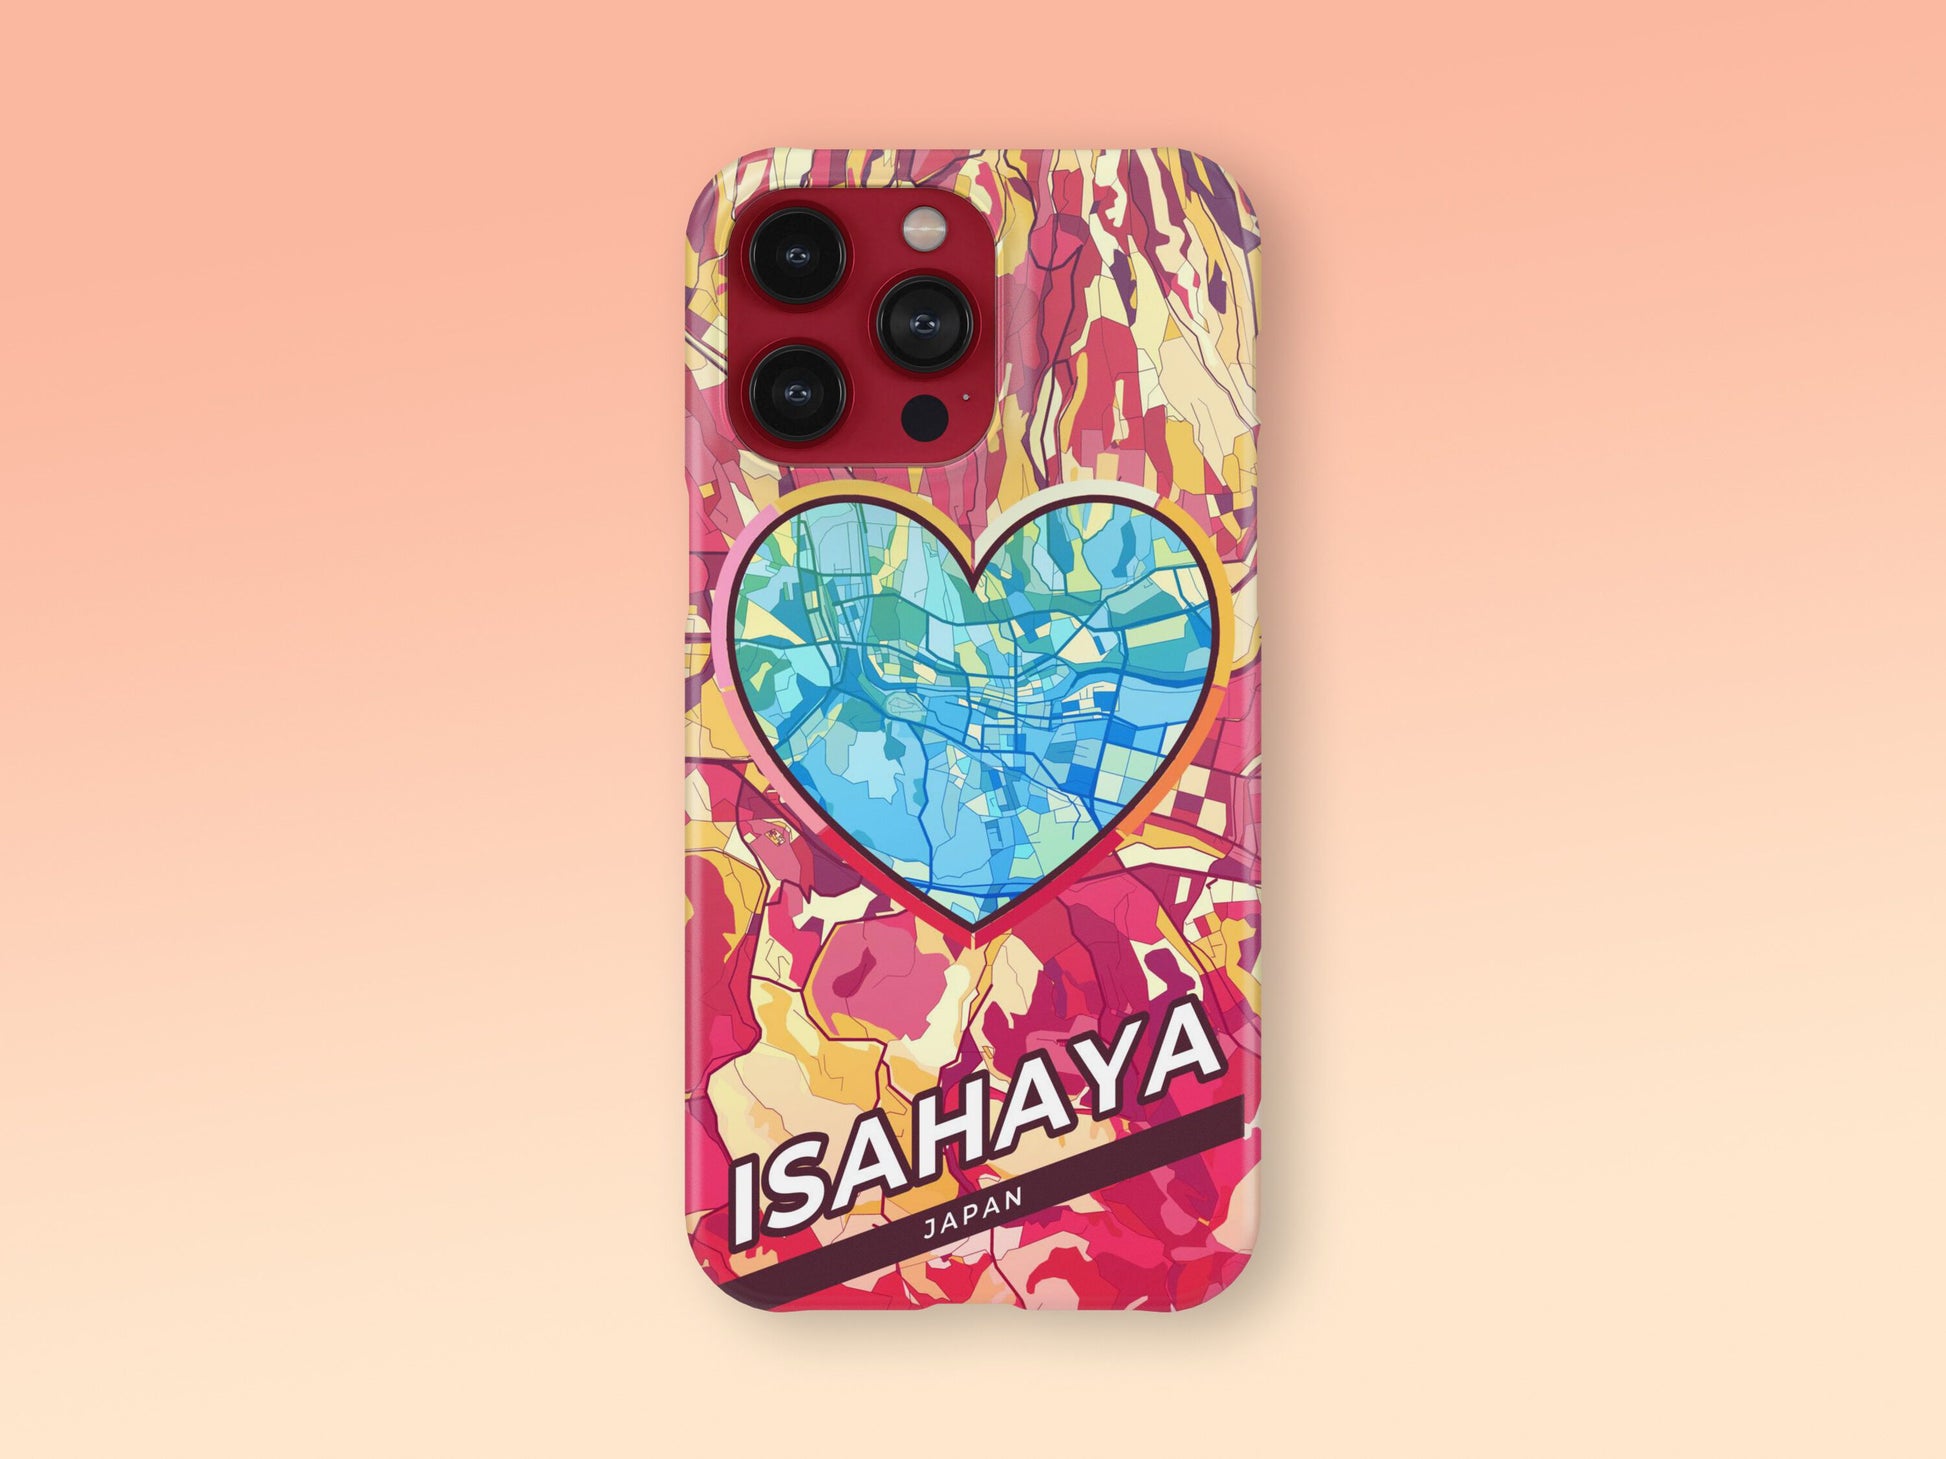 Isahaya Japan slim phone case with colorful icon. Birthday, wedding or housewarming gift. Couple match cases. 2